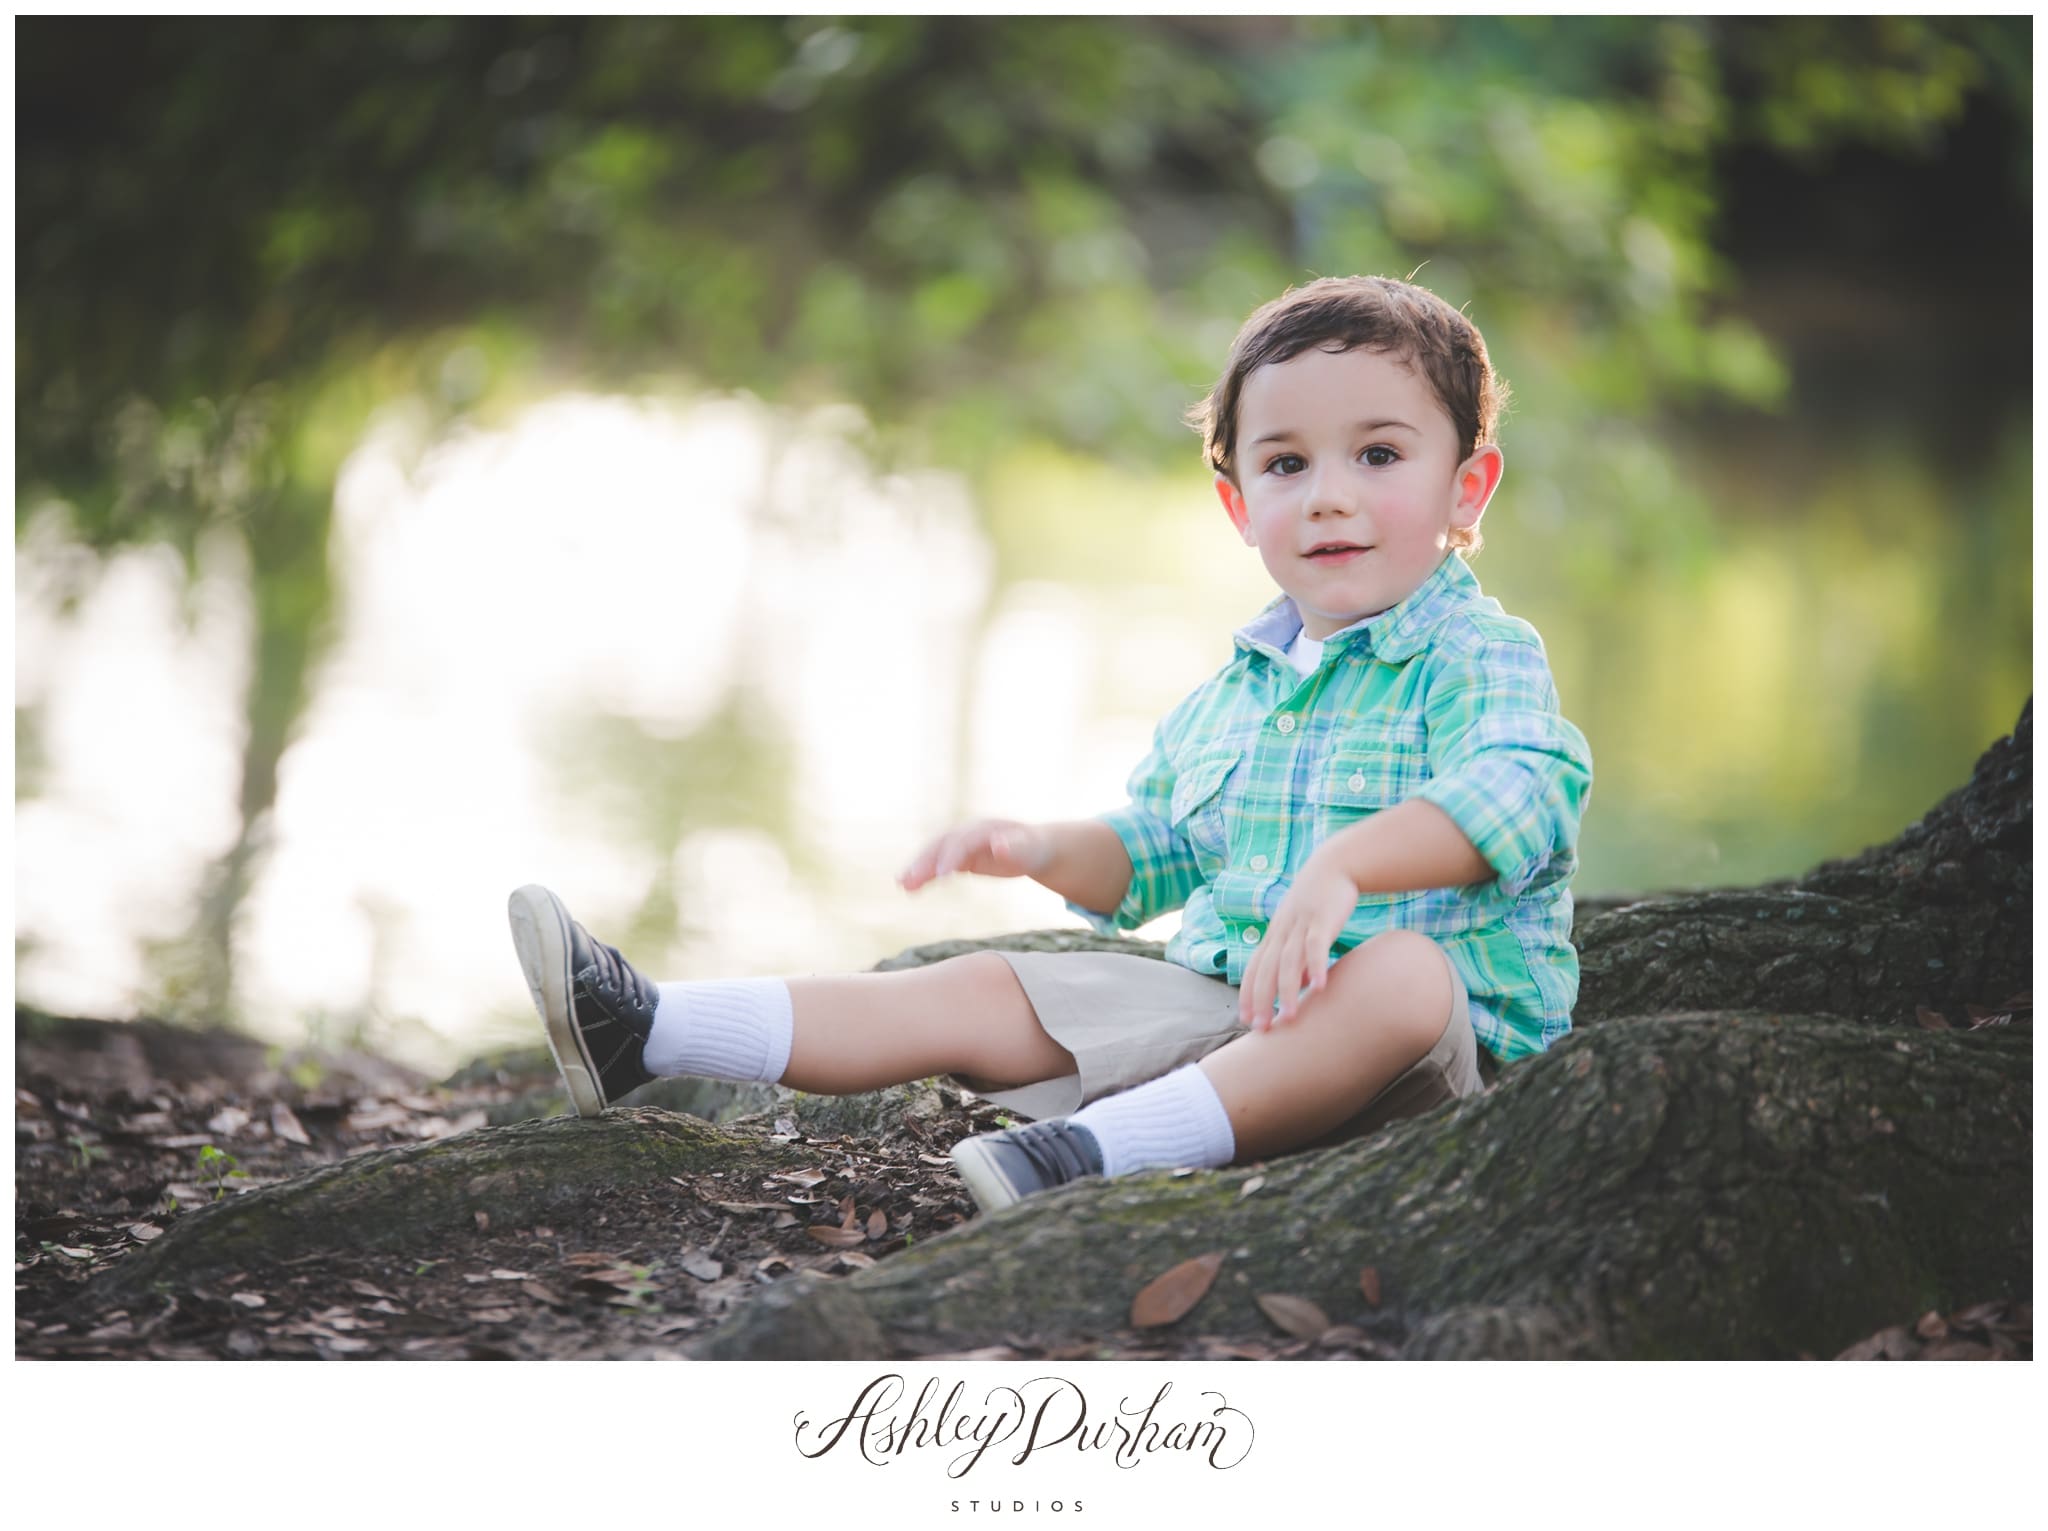 Palm Springs Family Photographer, Cathedral City Family Photographer, Indio Family Photographer